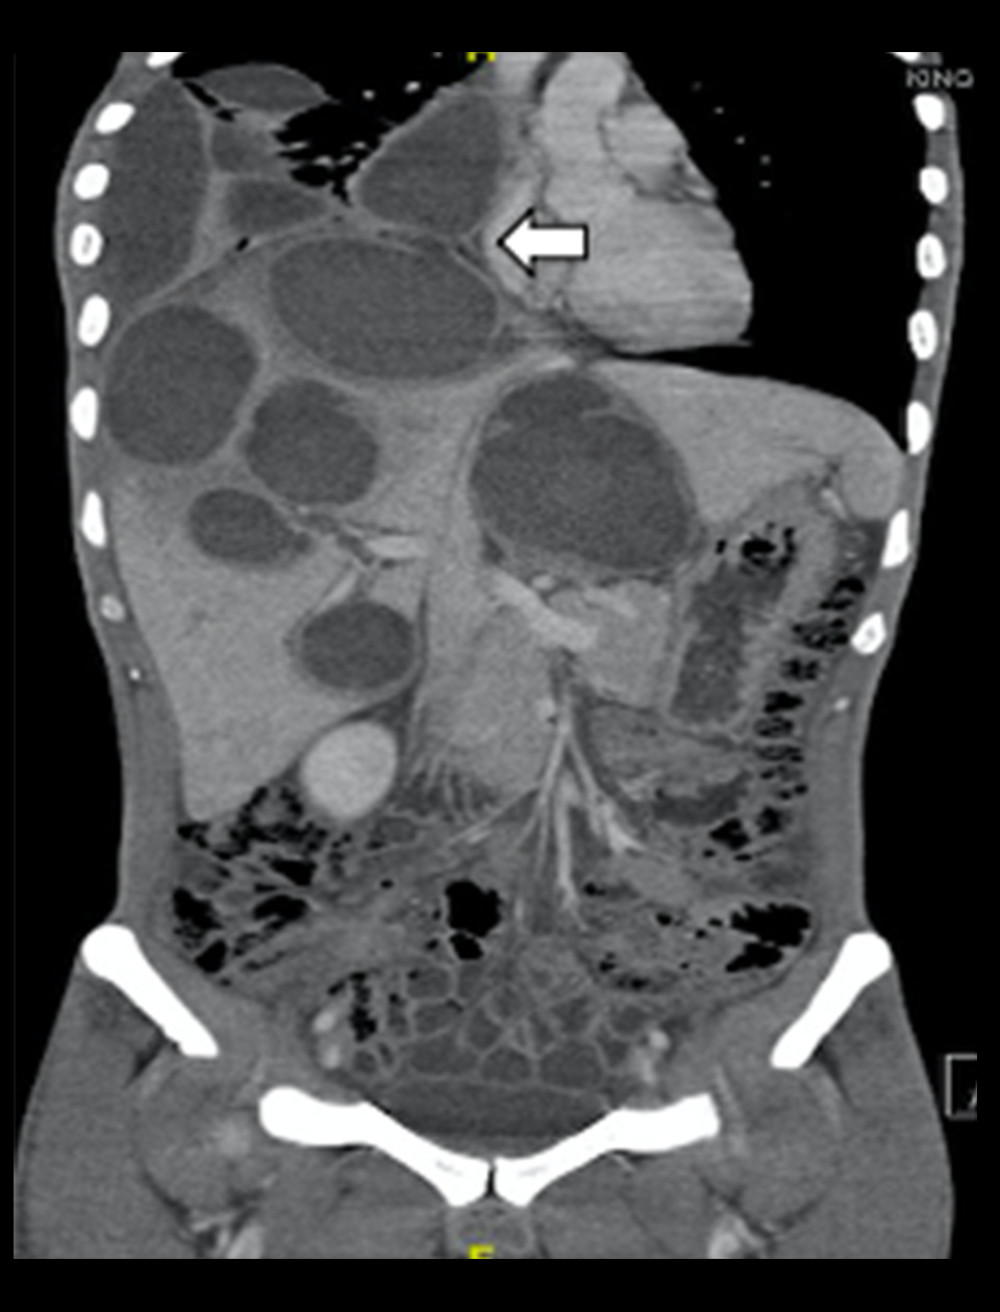 Contrast-enhanced computed tomography scan of the abdomen showing massive hepatomegaly with multiple hypodense lesions communicating with the mediastinum and the pleural cavity (white arrow indicates the point of communication).